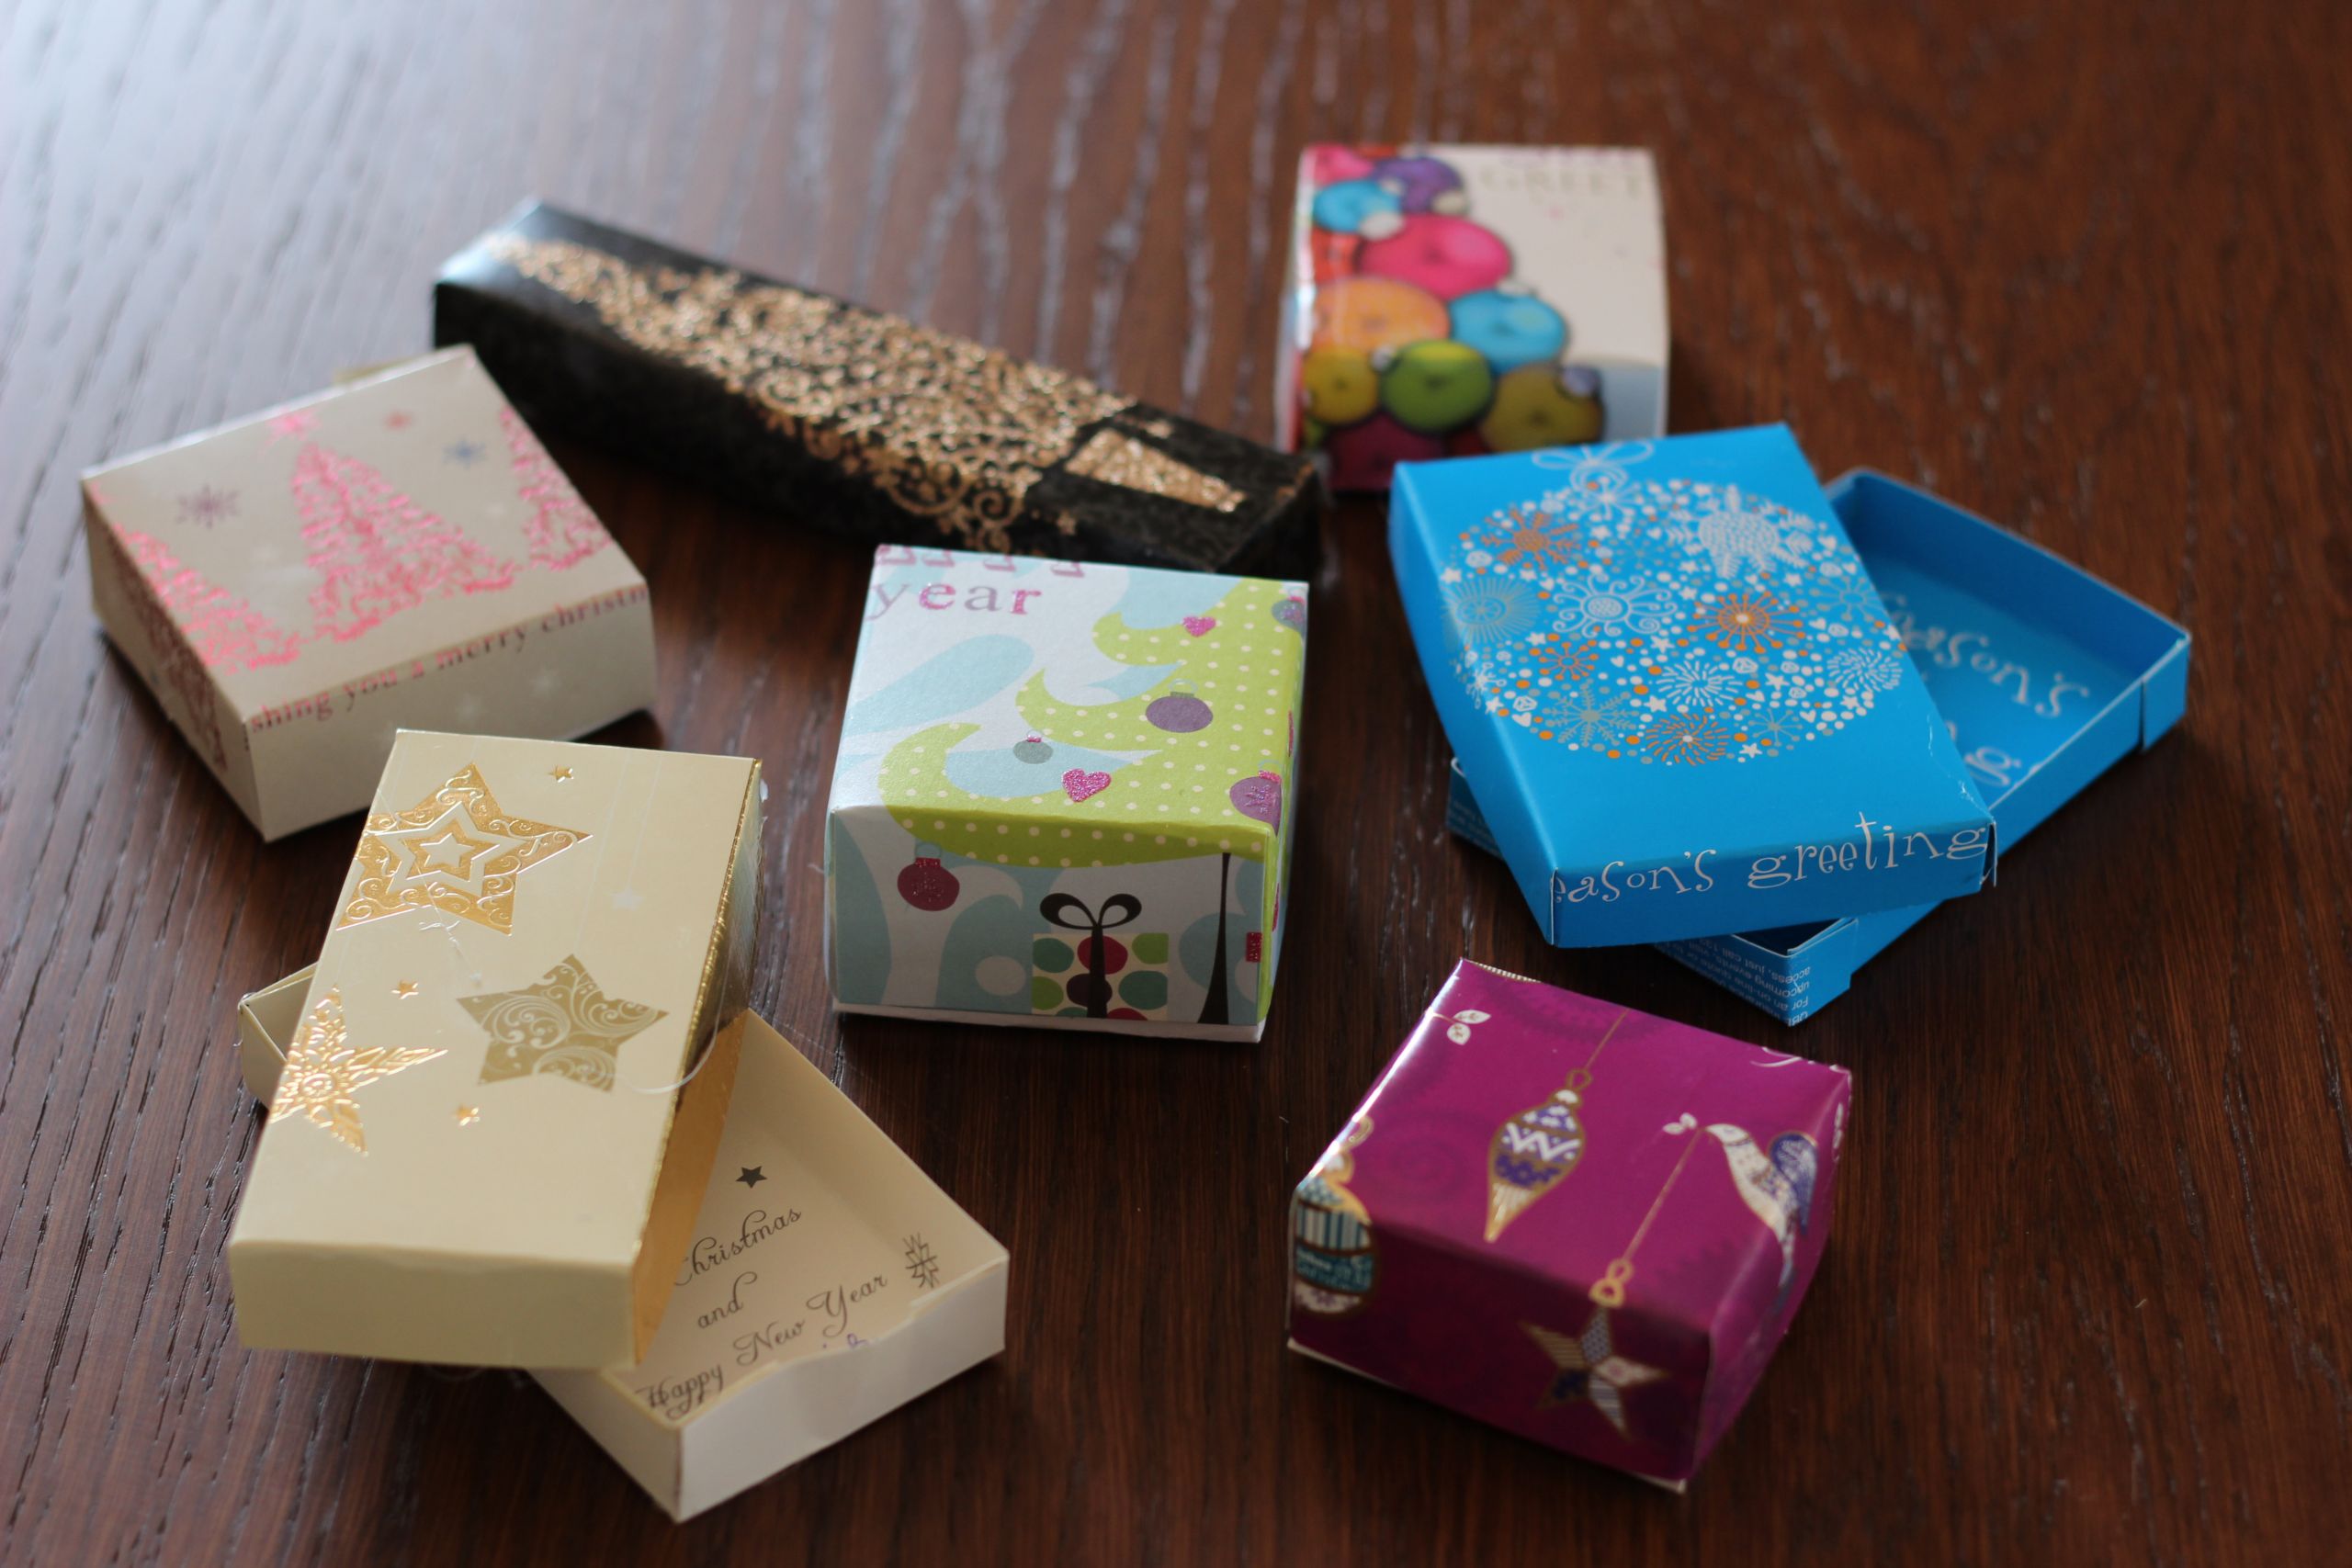 DIY Gift Card Boxes
 DIY Gift Boxes from Recycled Cards